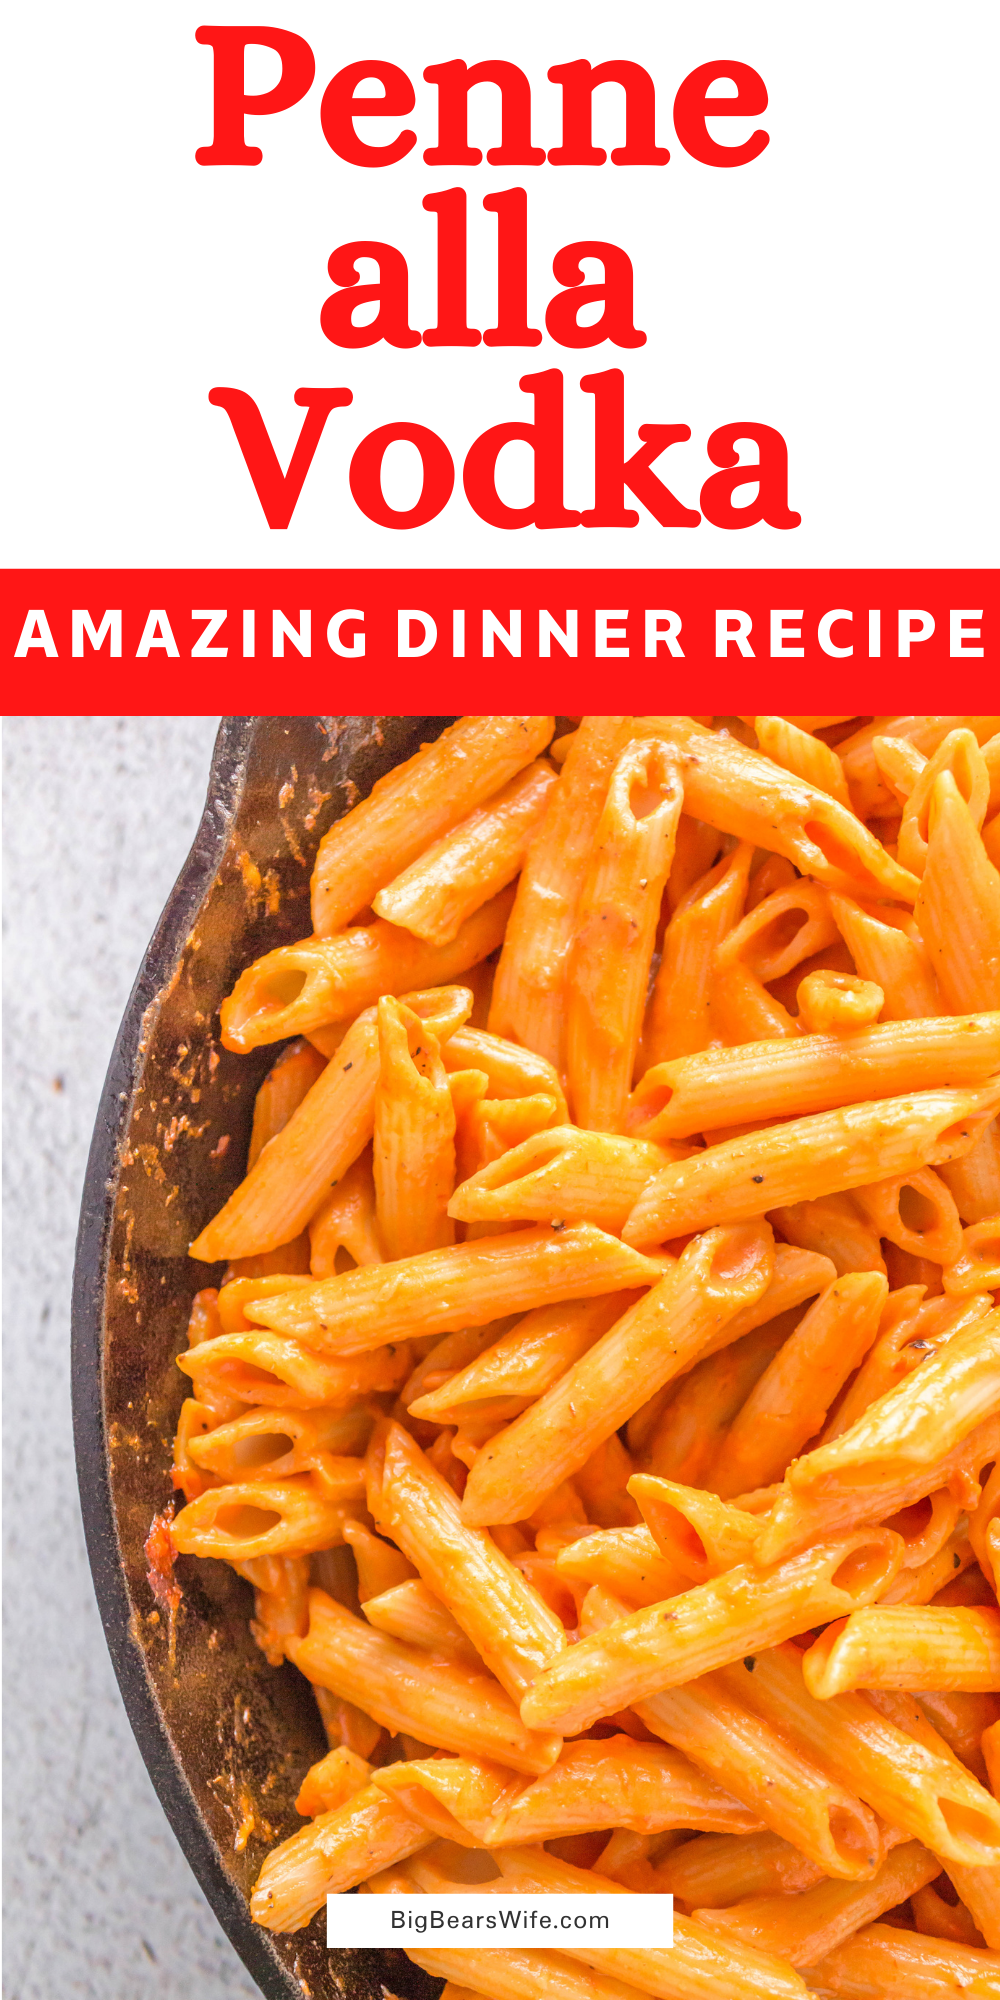 This Penne alla Vodka recipe is ready in under 30 minutes with perfectly cooked penne pasta, a creamy homemade tomato vodka sauce and fresh parmesan cheese. Not a fan of vodka? No problem! We can change it out for chicken broth!  via @bigbearswife